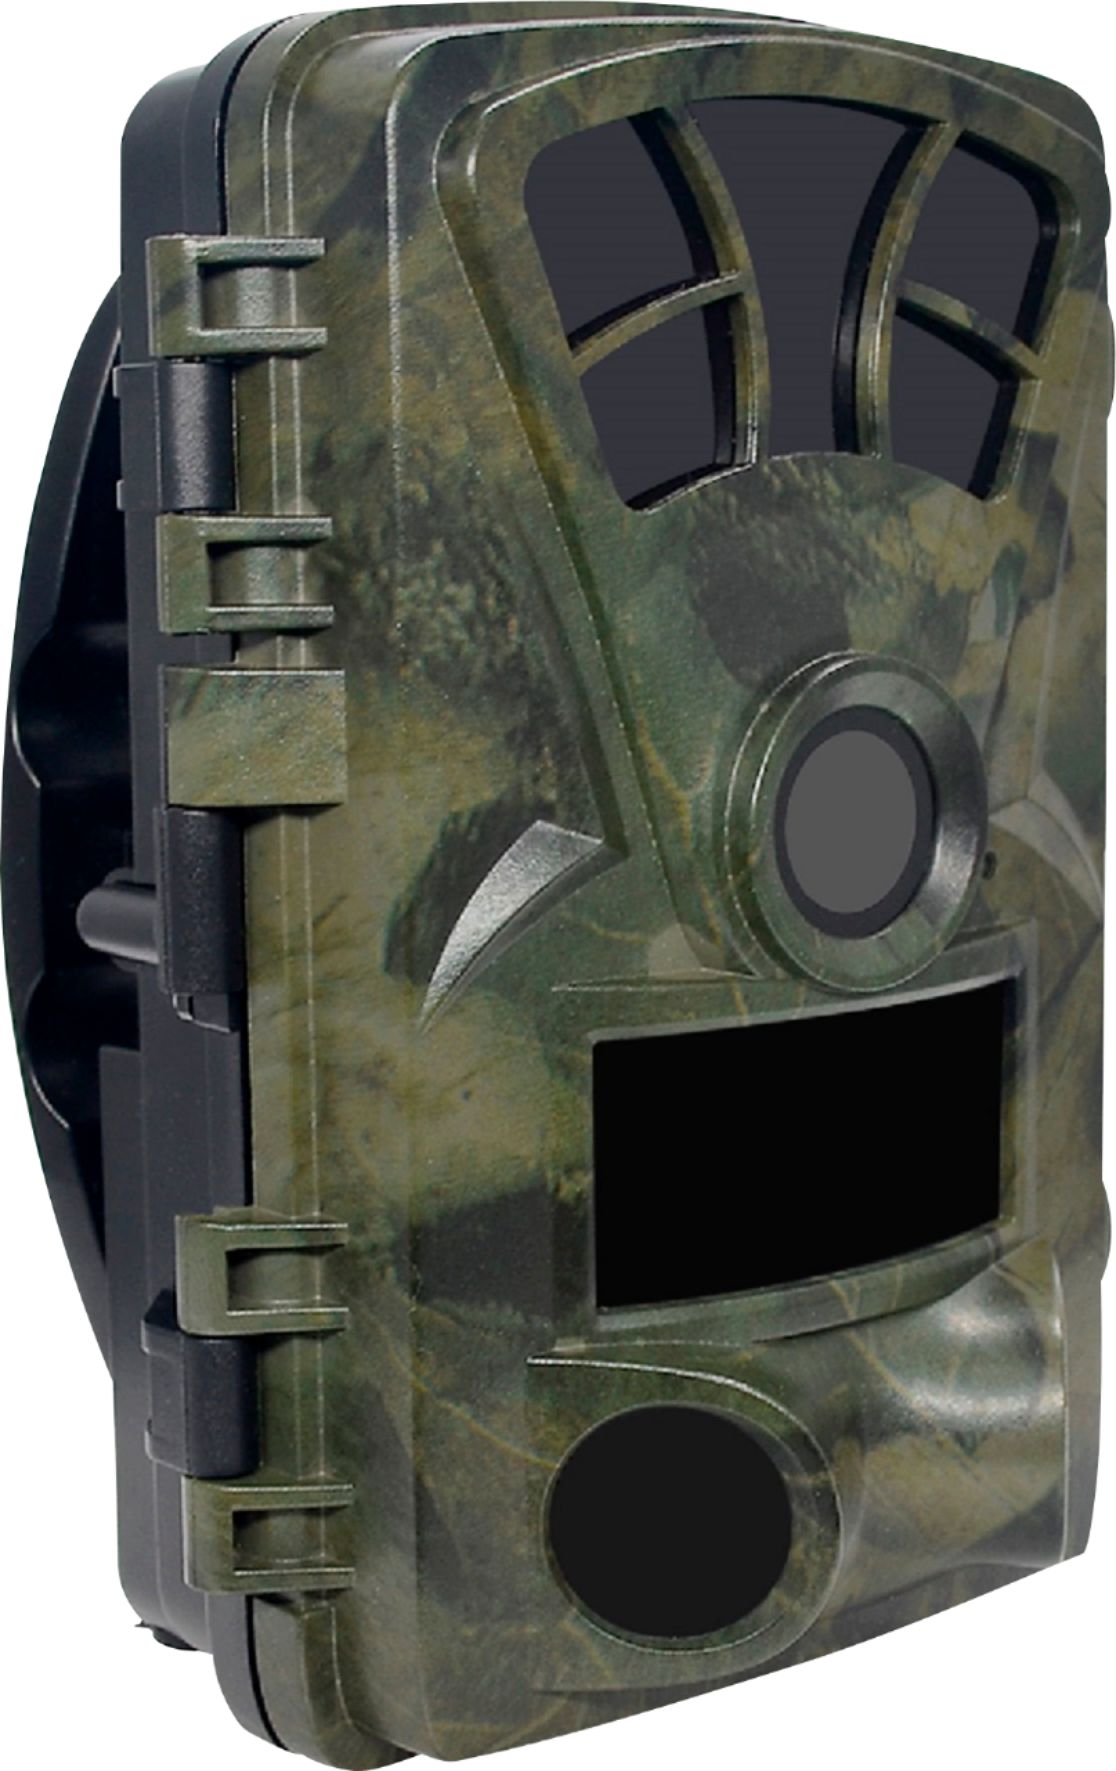 Angle View: Rexing - H2 4K Wi-Fi Trail Camera with Ultra Night Vision for Hunting Games and Wildlife Monitoring - Green